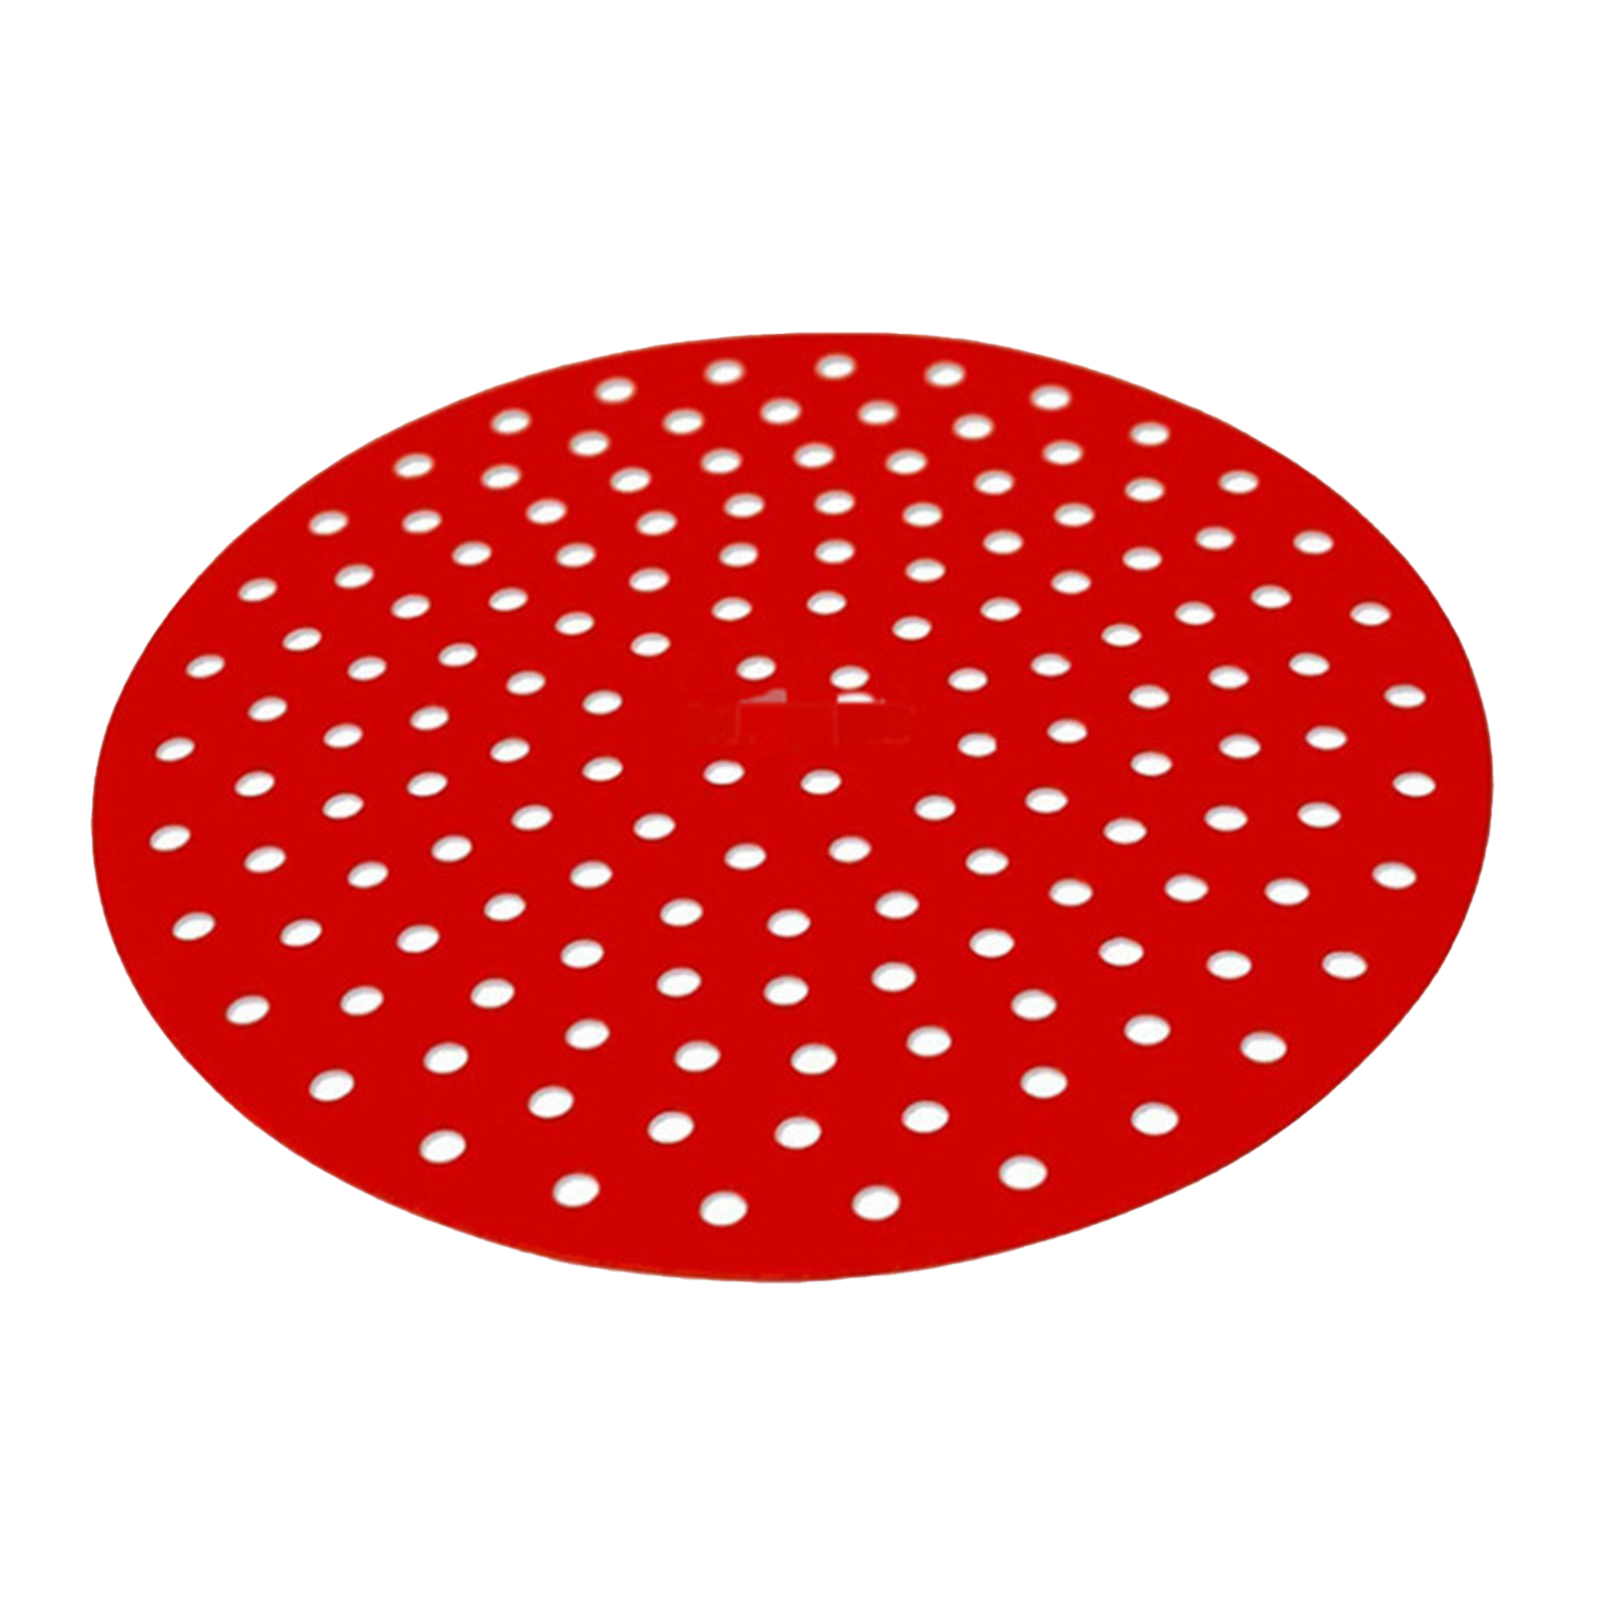 BPA-free Anti-slip Air Fryer Pads Round, 8 Inch Easy to Clean Silicone Air Fryer Basket Mats Non-Stick air fryer accessories for Baking & for Bamboo Steamers MNR 2 Pcs Reusable Air Fryer Liners 